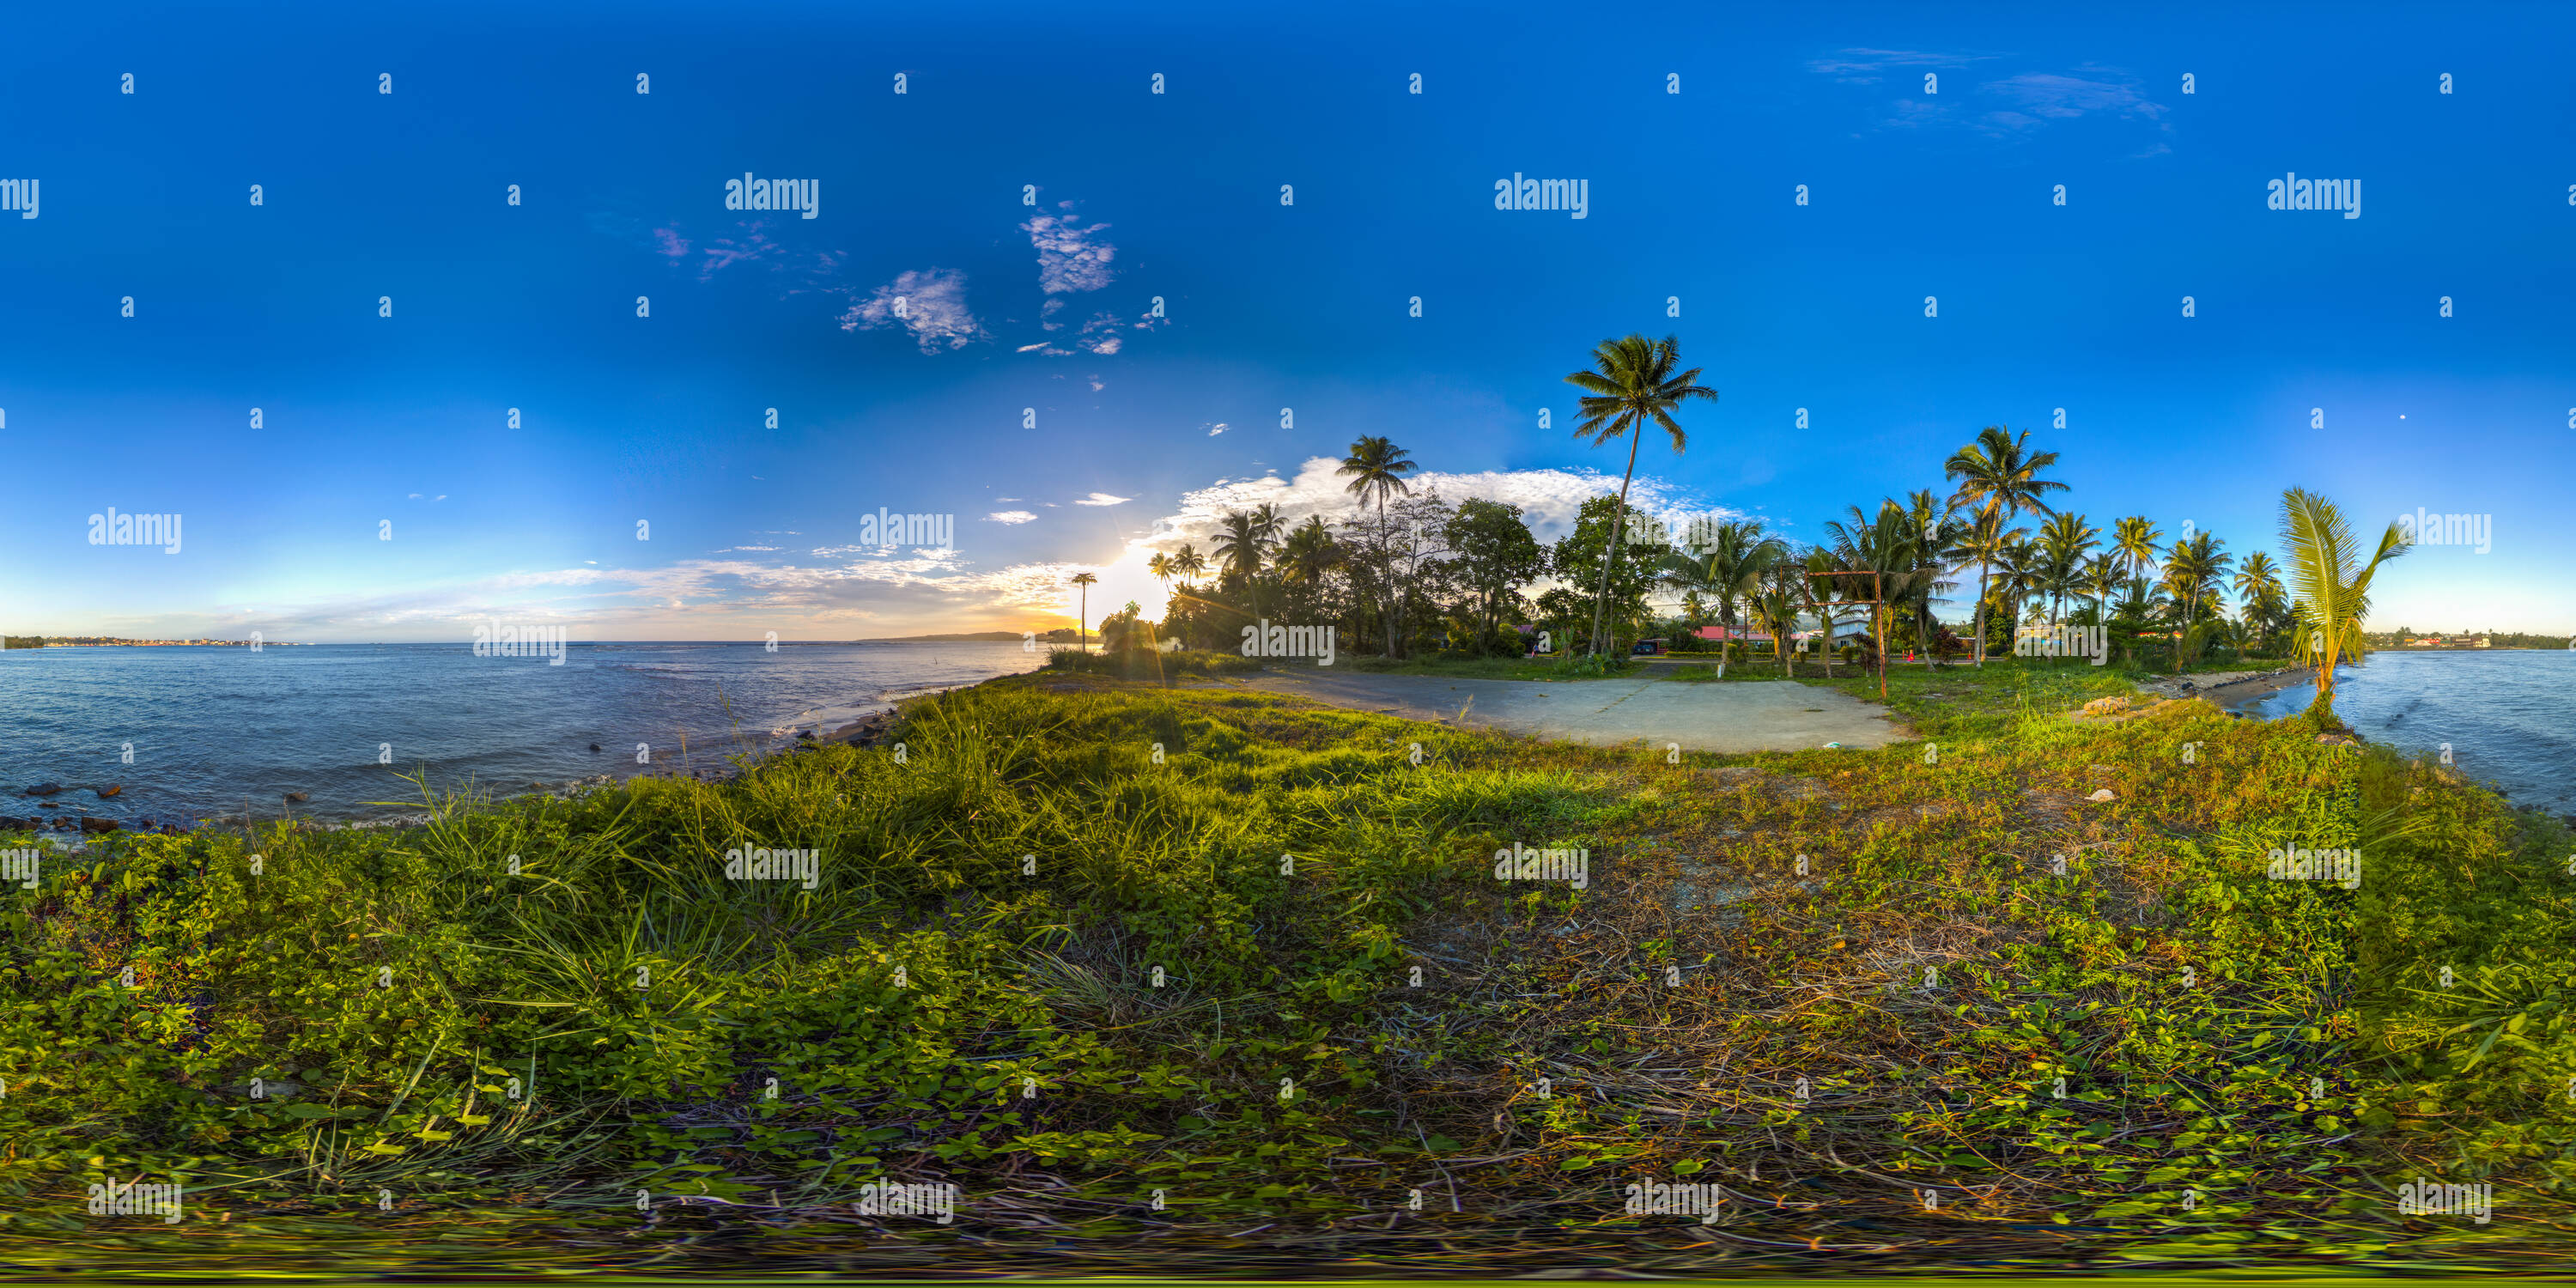 360 degree panoramic view of Small park in Lami at sunset